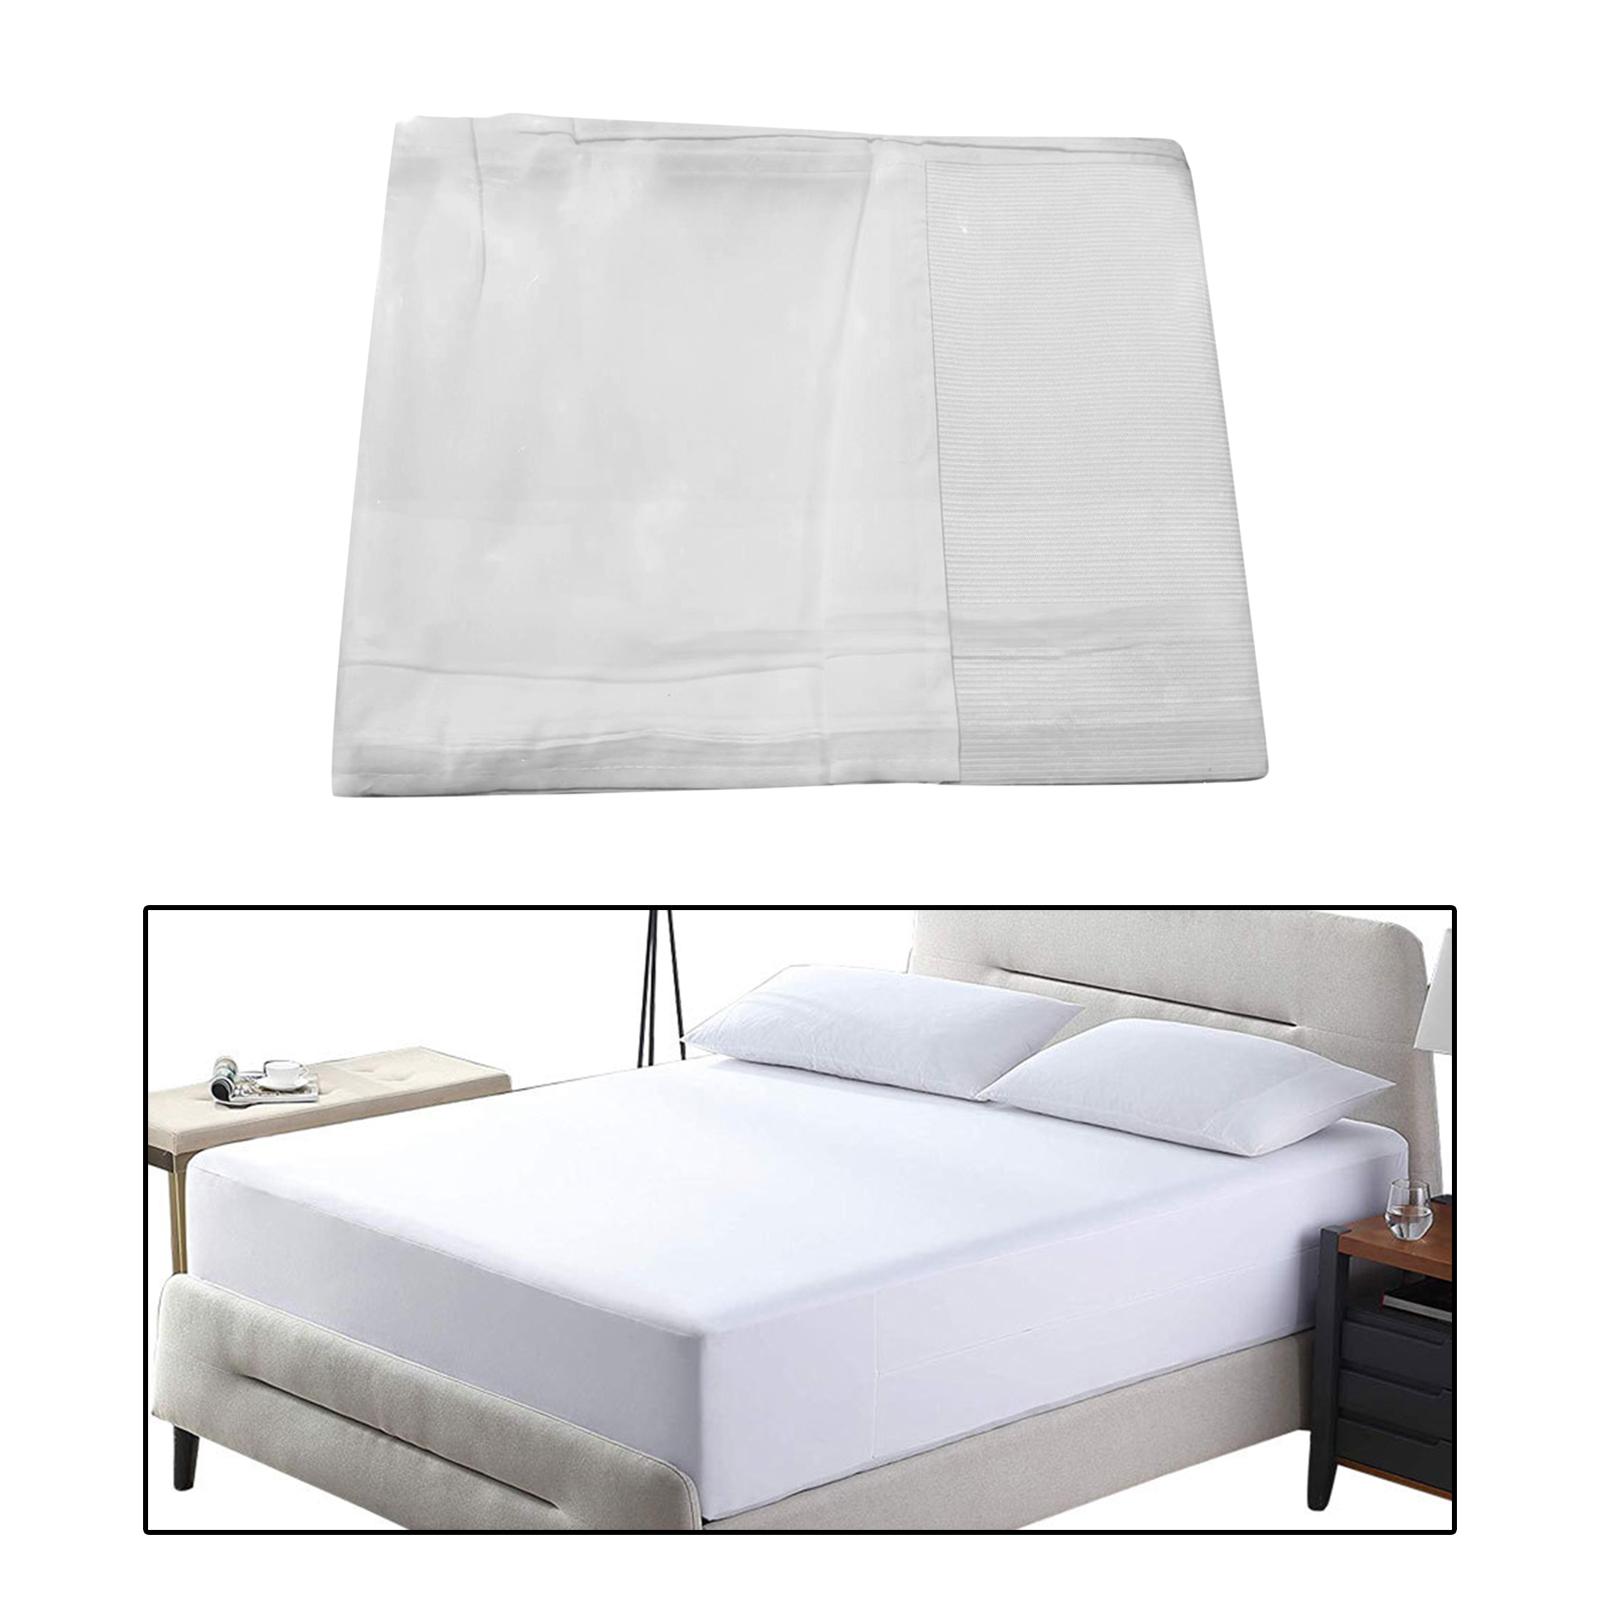 Fitted Sheet Queen Size Mattress Cover Household Supplies Durable Bed Sheets